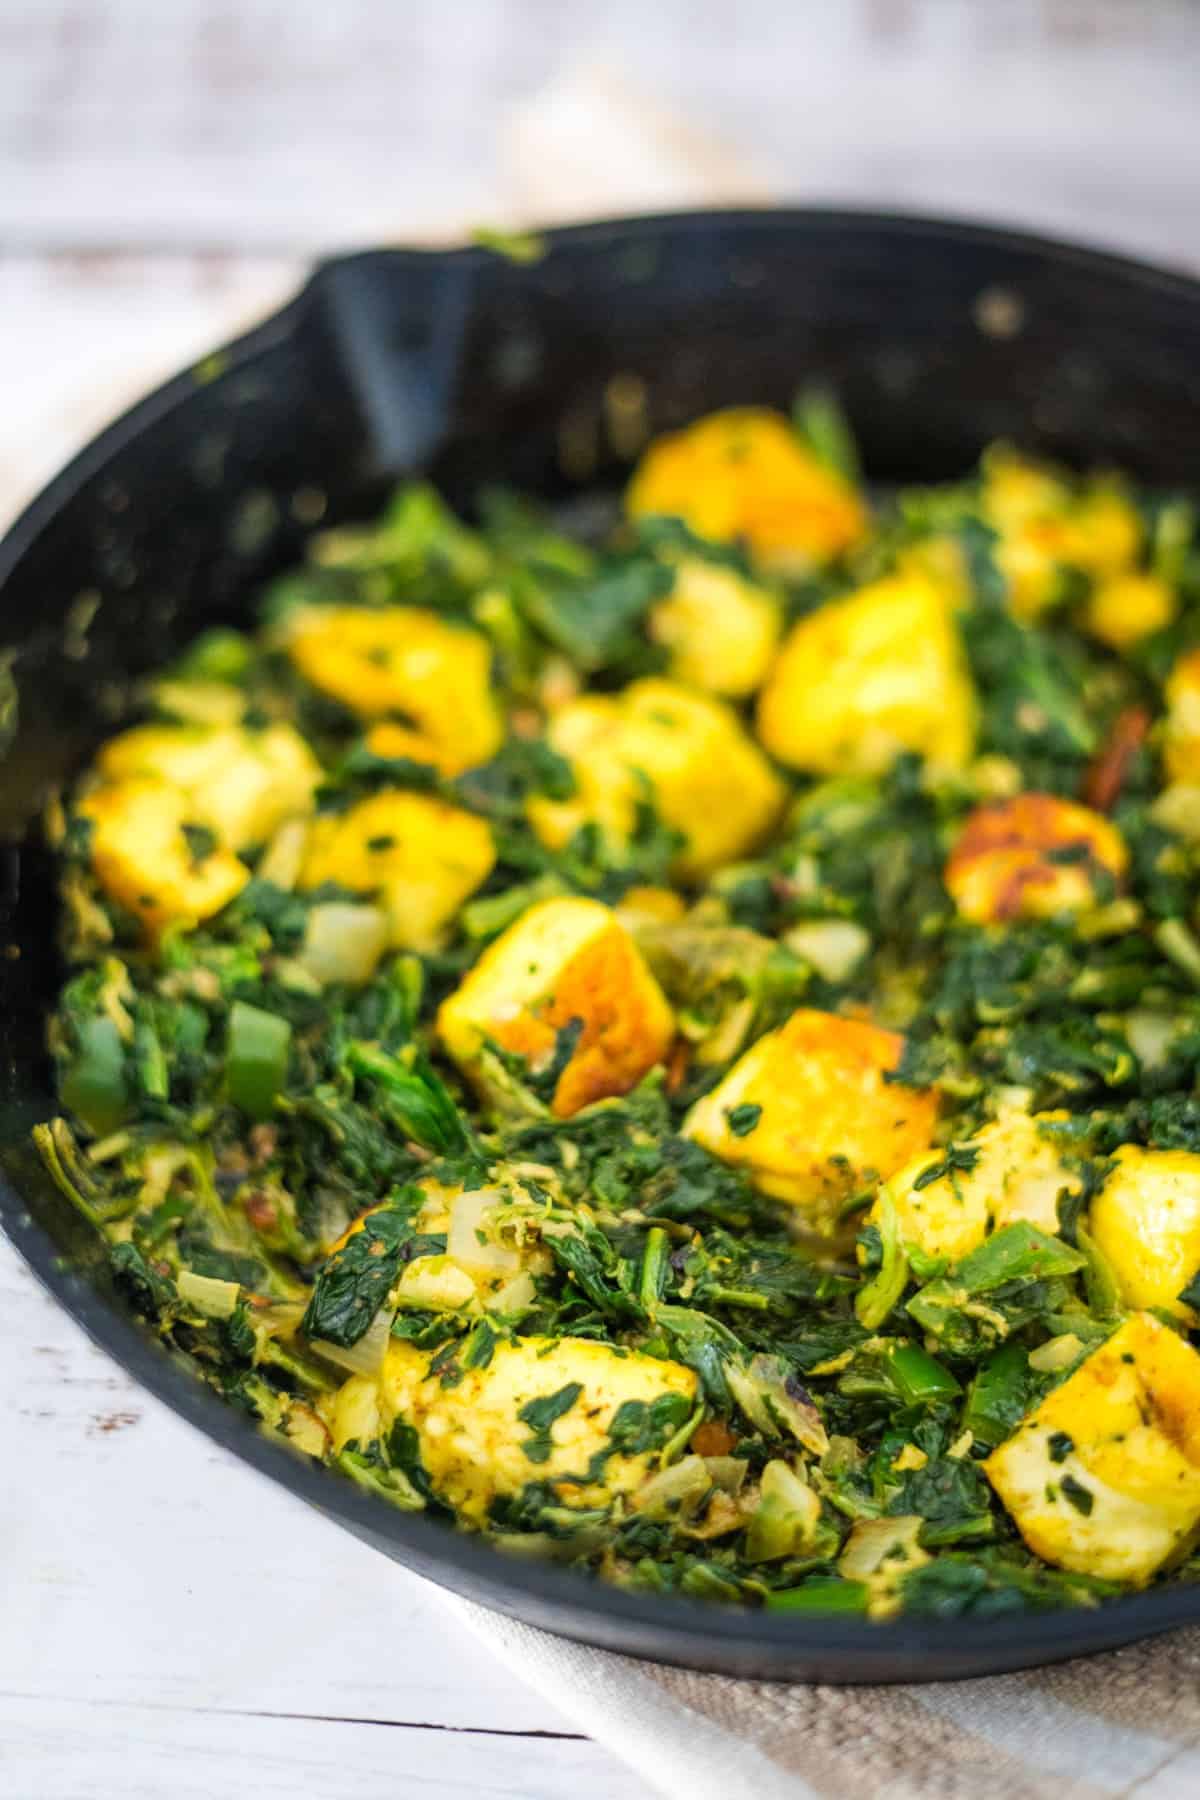 halloumi cheese cubes in a spicy spinach mixture.